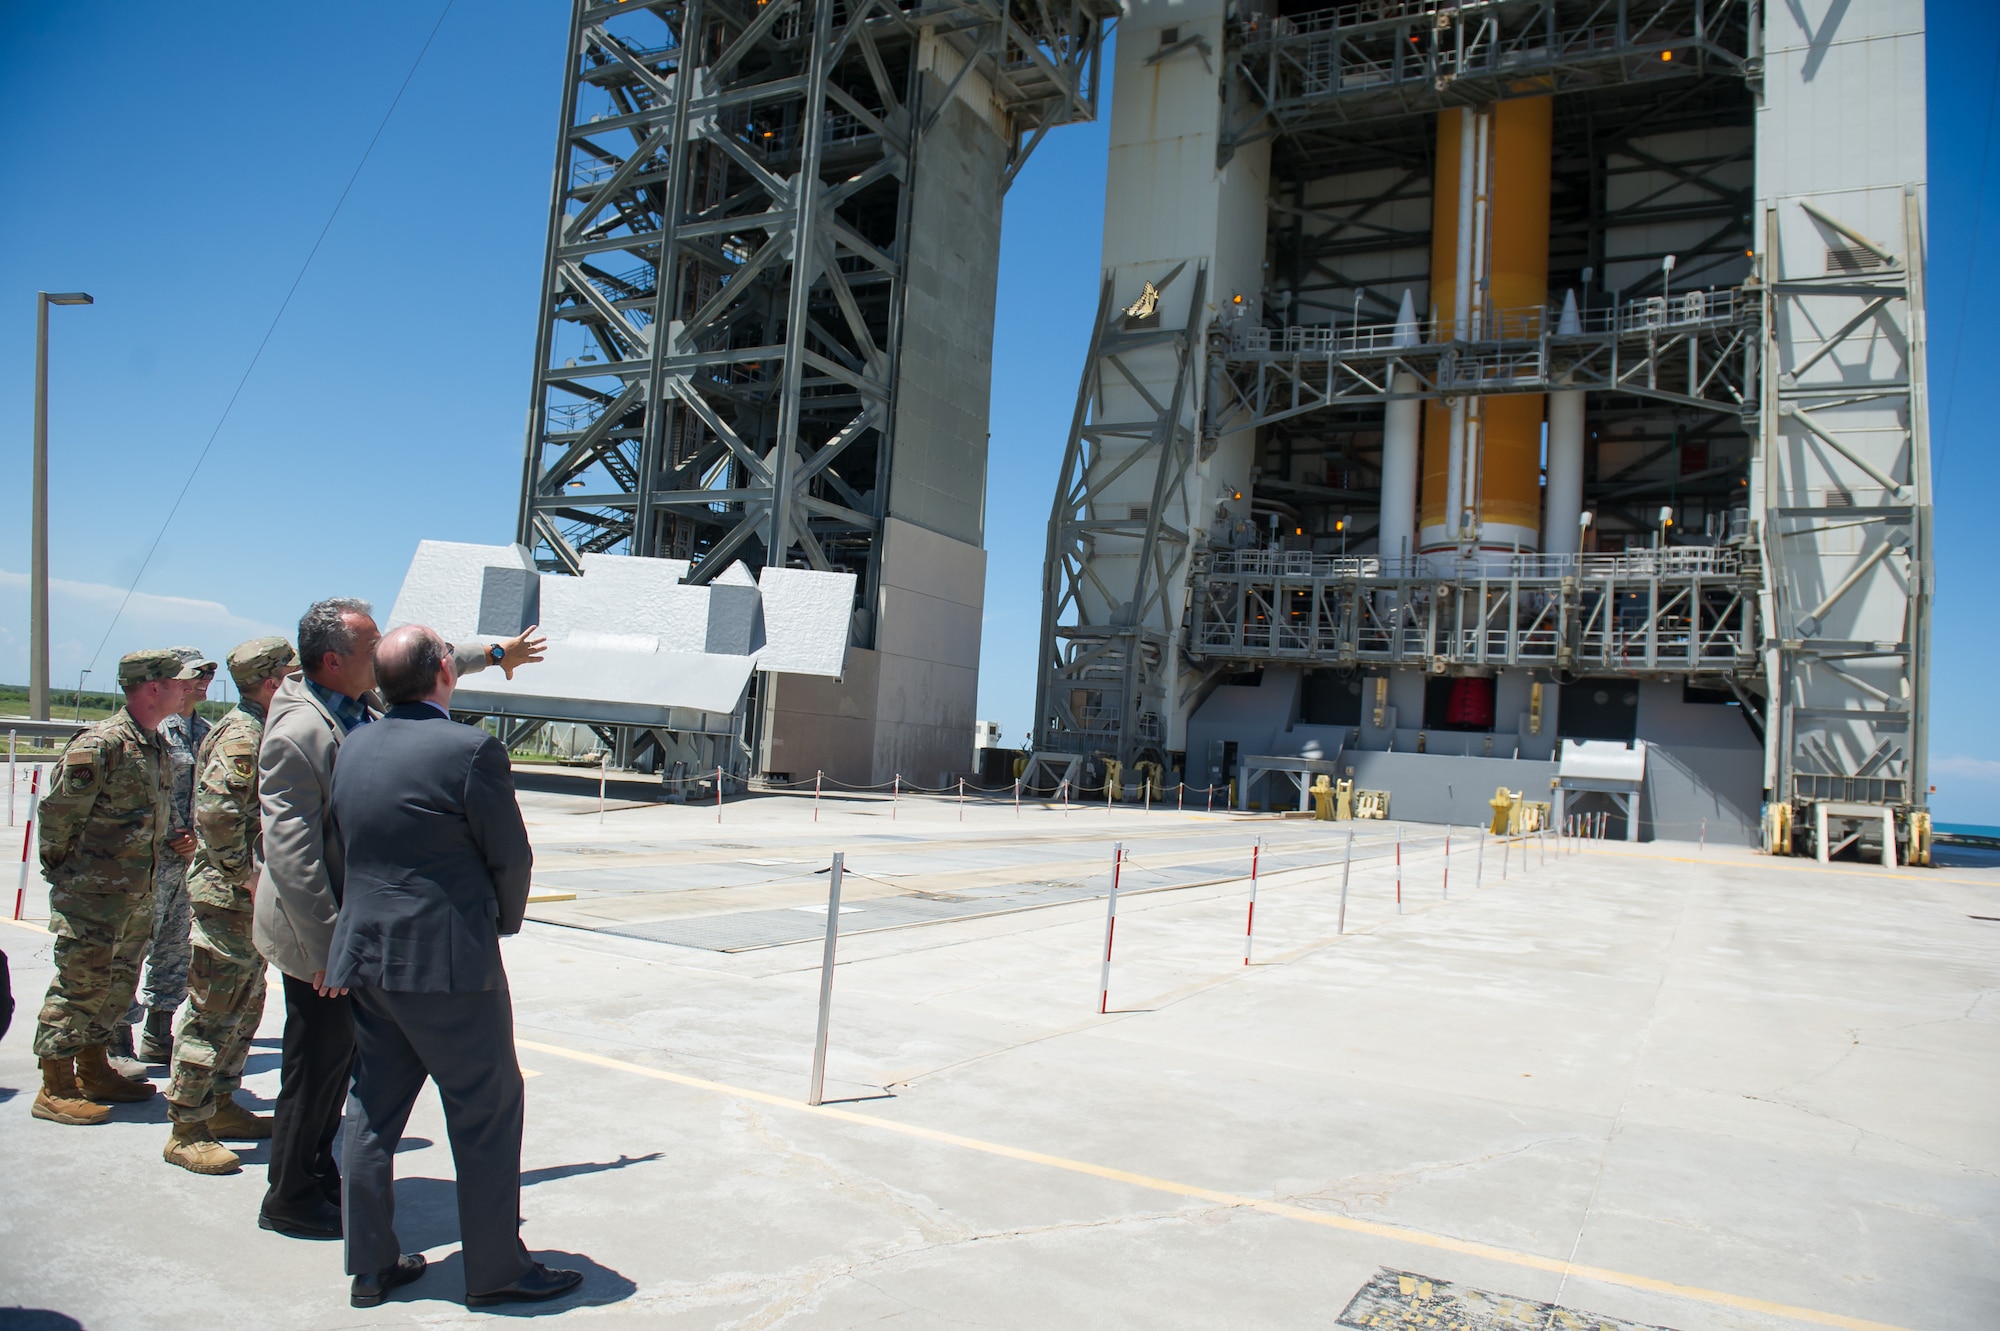 Acting Secretary of the Air Force Matthew Donovan is shown United Launch Alliance’s Delta IV rocket on Space Launch Complex-37 on July 19, 2019, at Cape Canaveral Air Force Station, Fla. Donovan visited the 45th Space Wing at Patrick Air Force Base, Fla., to become more familiar with space launch operations and to celebrate the 50th anniversary of NASA’s Apollo 11 mission. (U.S. Air Force photo by Jared Trimarchi)